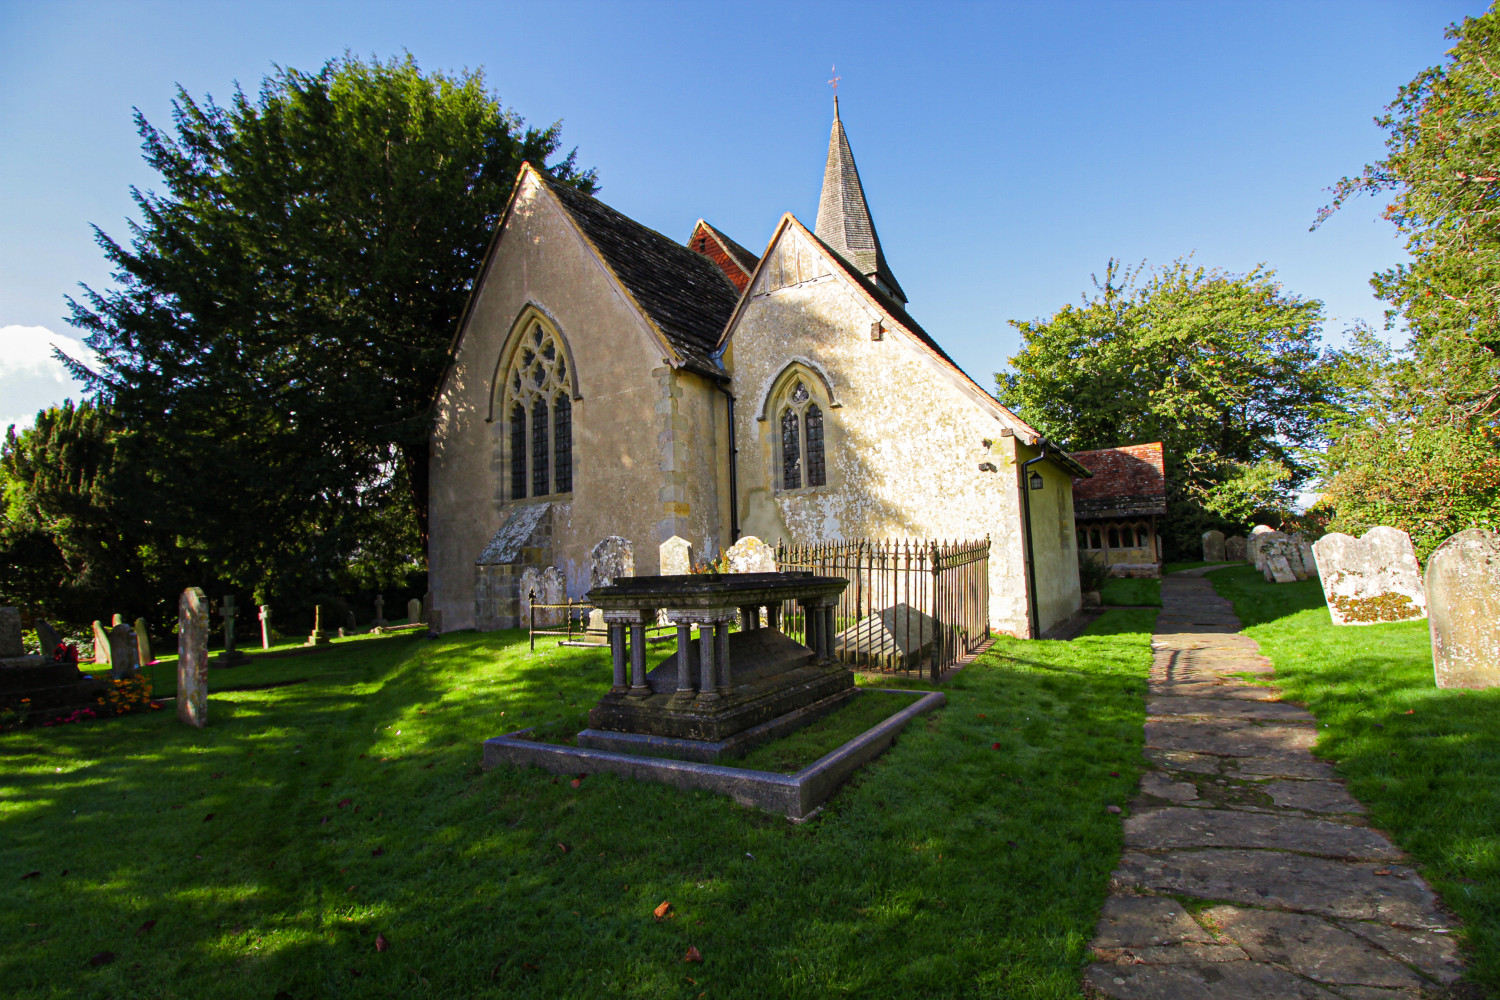 Exterior of a rural church and graveyard in the sunshine